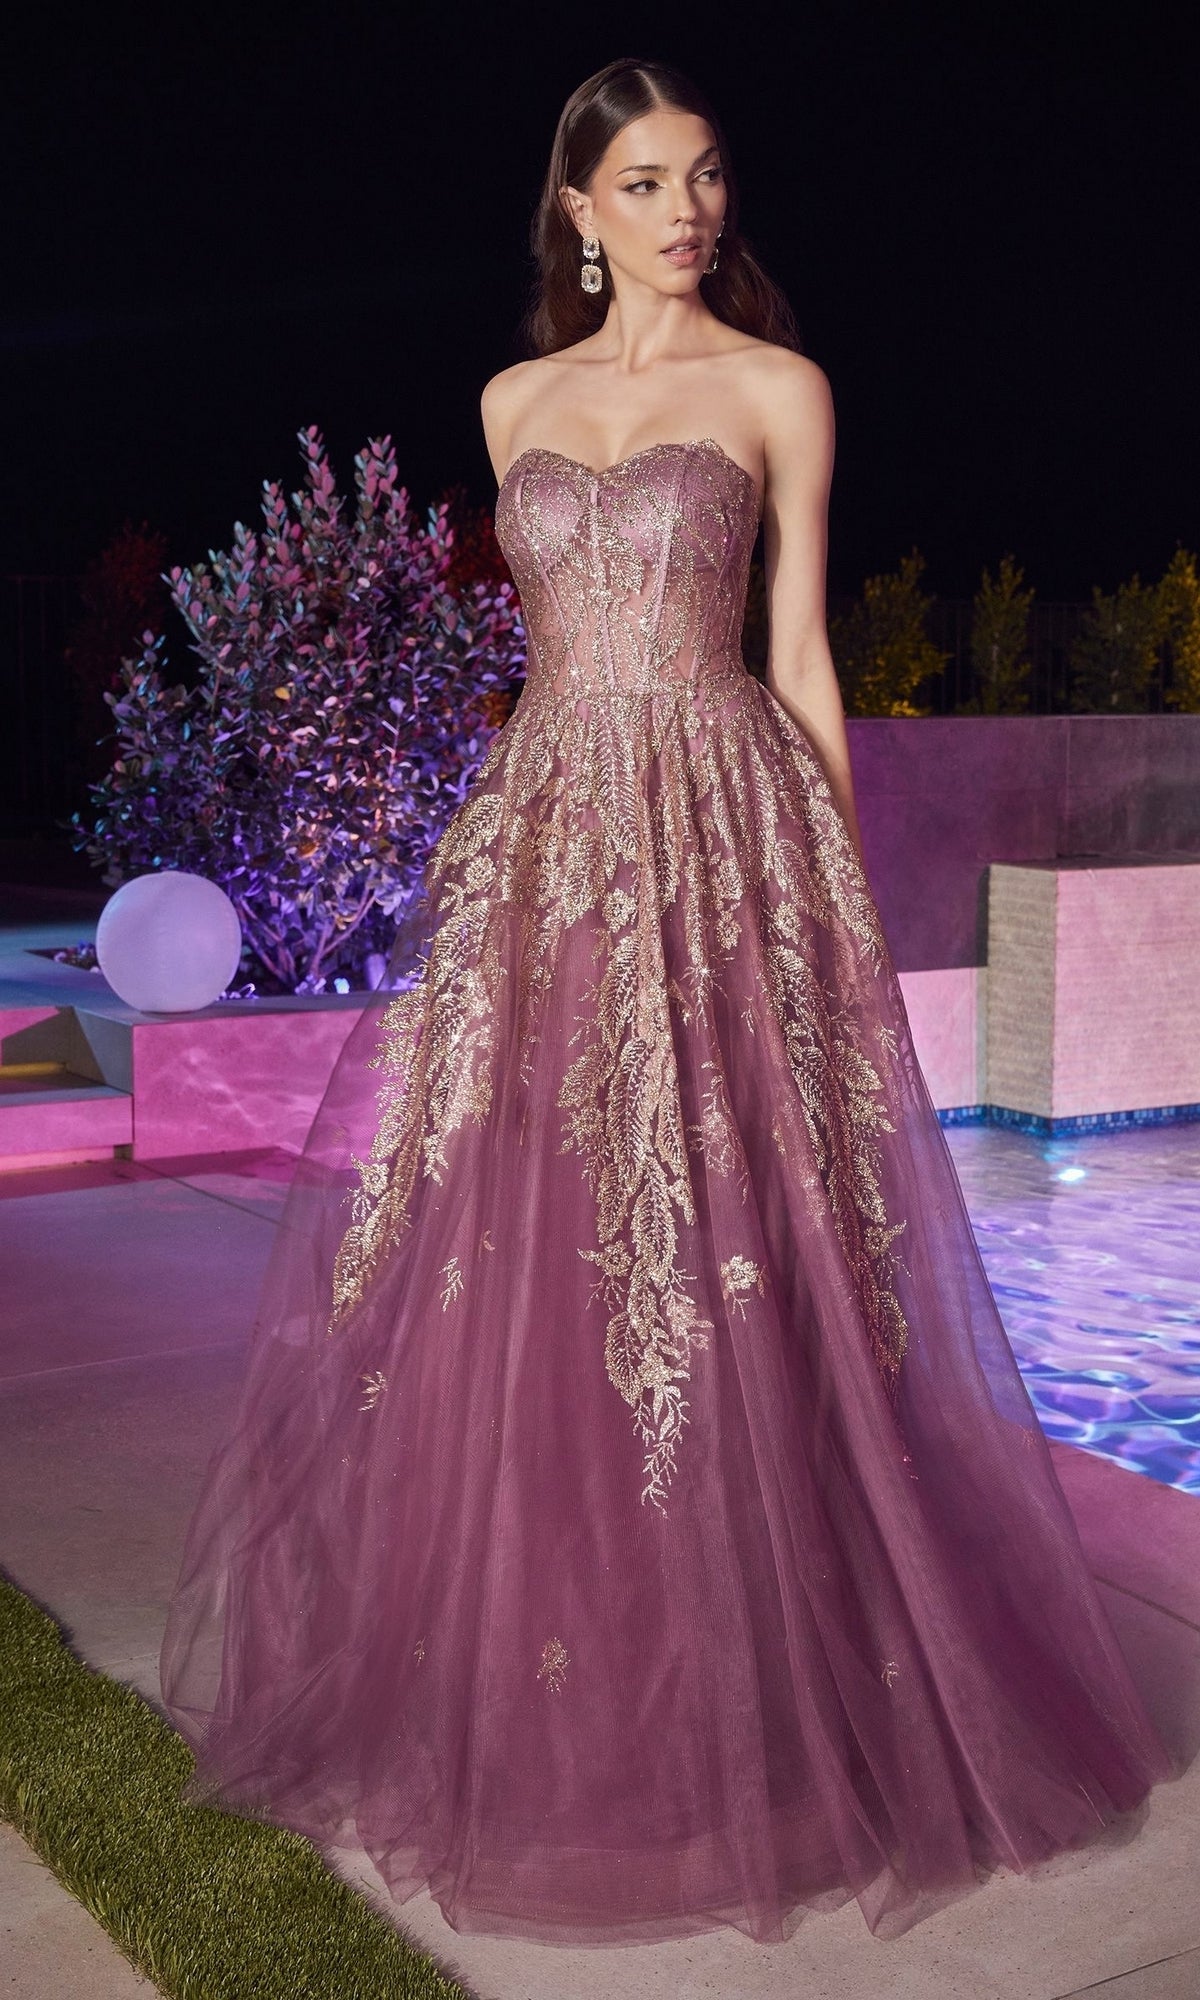 Strapless Sweetheart Long Prom Ball Gown J852